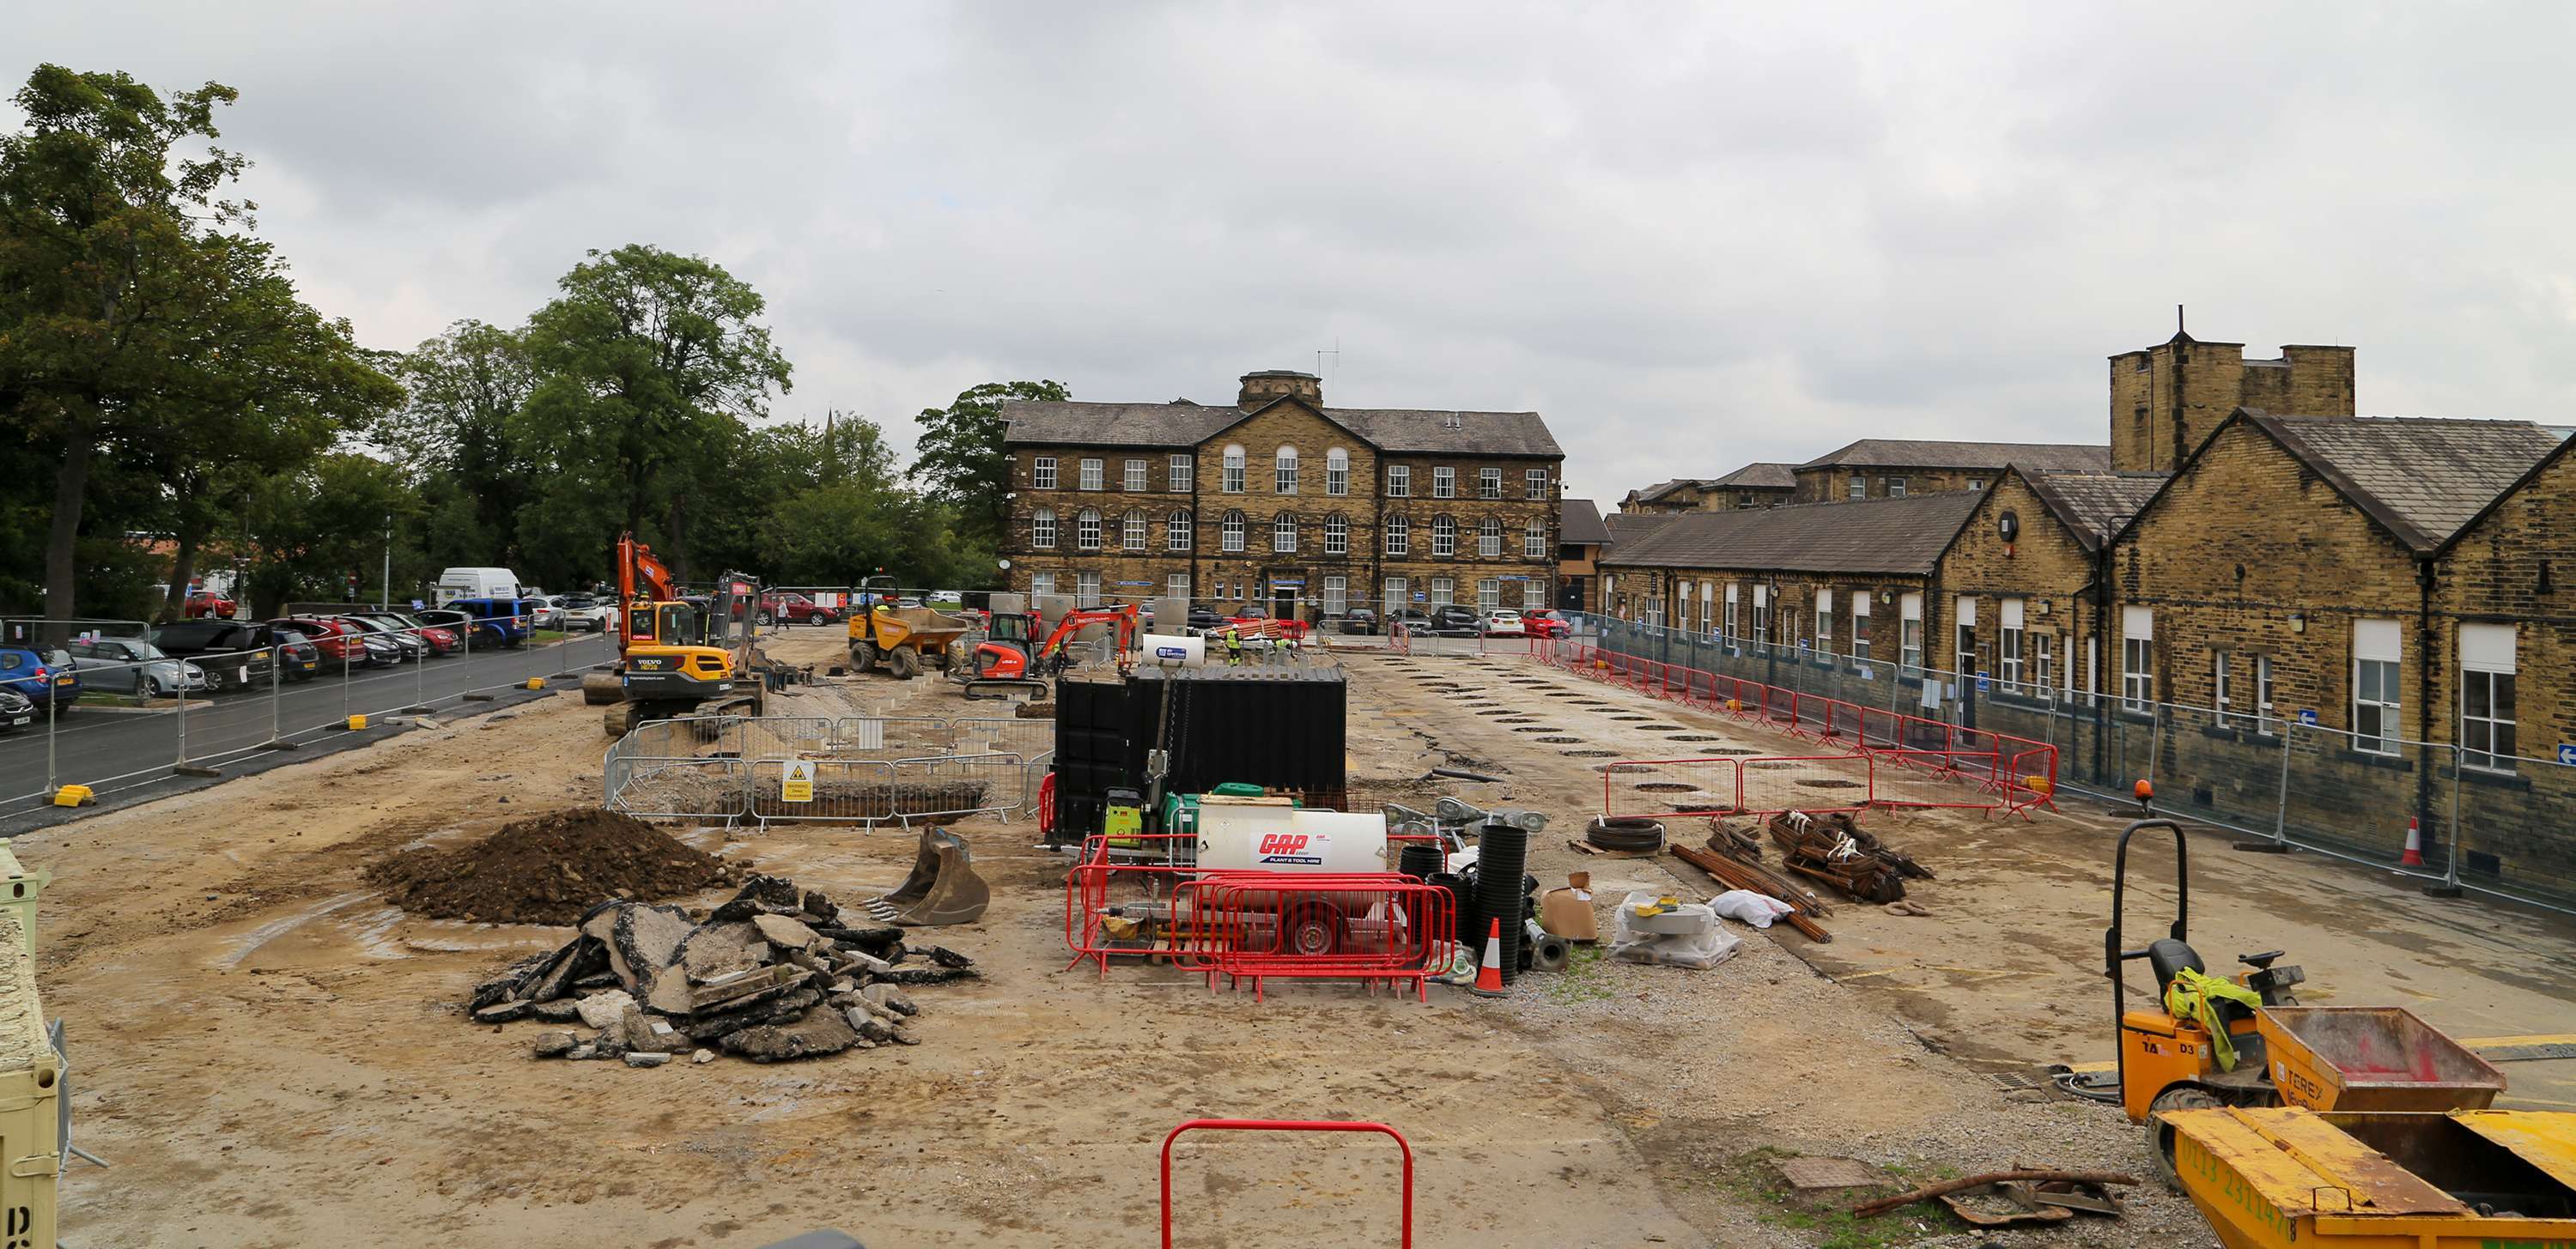 An overview of the St Luke's site in Bradford while groundworks were underway. There is a small site cabin in the middle of the picture, steel fencing all around the construction site and a number of items of plant machinery, including dumper trucks and diggers, around the site.